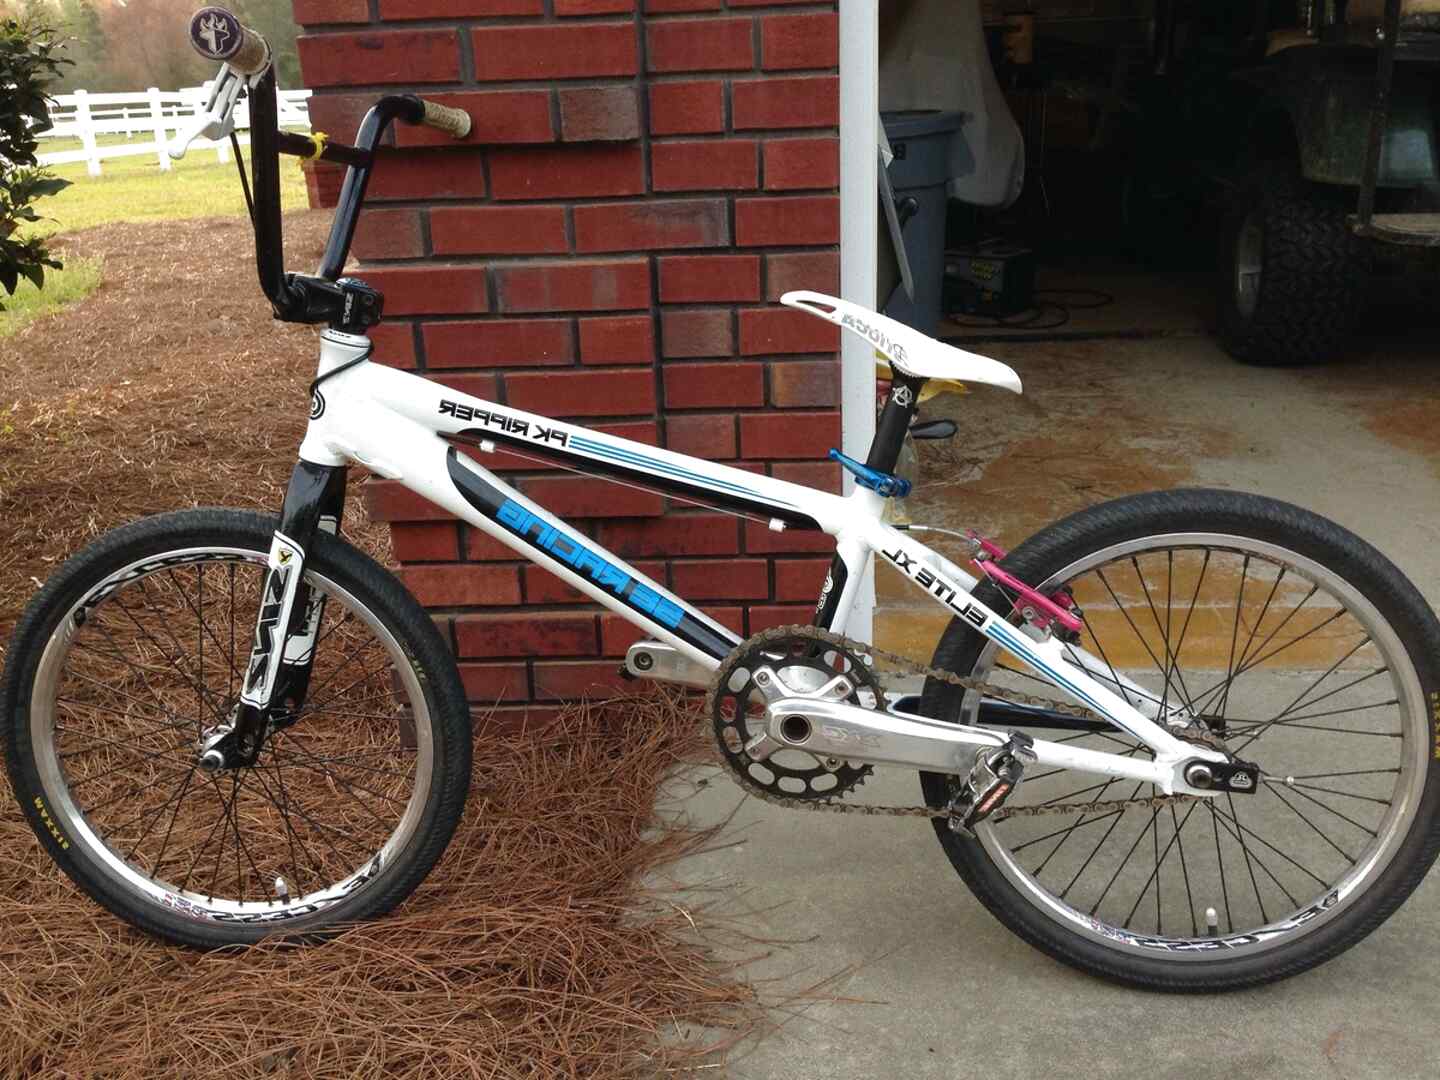 used race bikes for sale